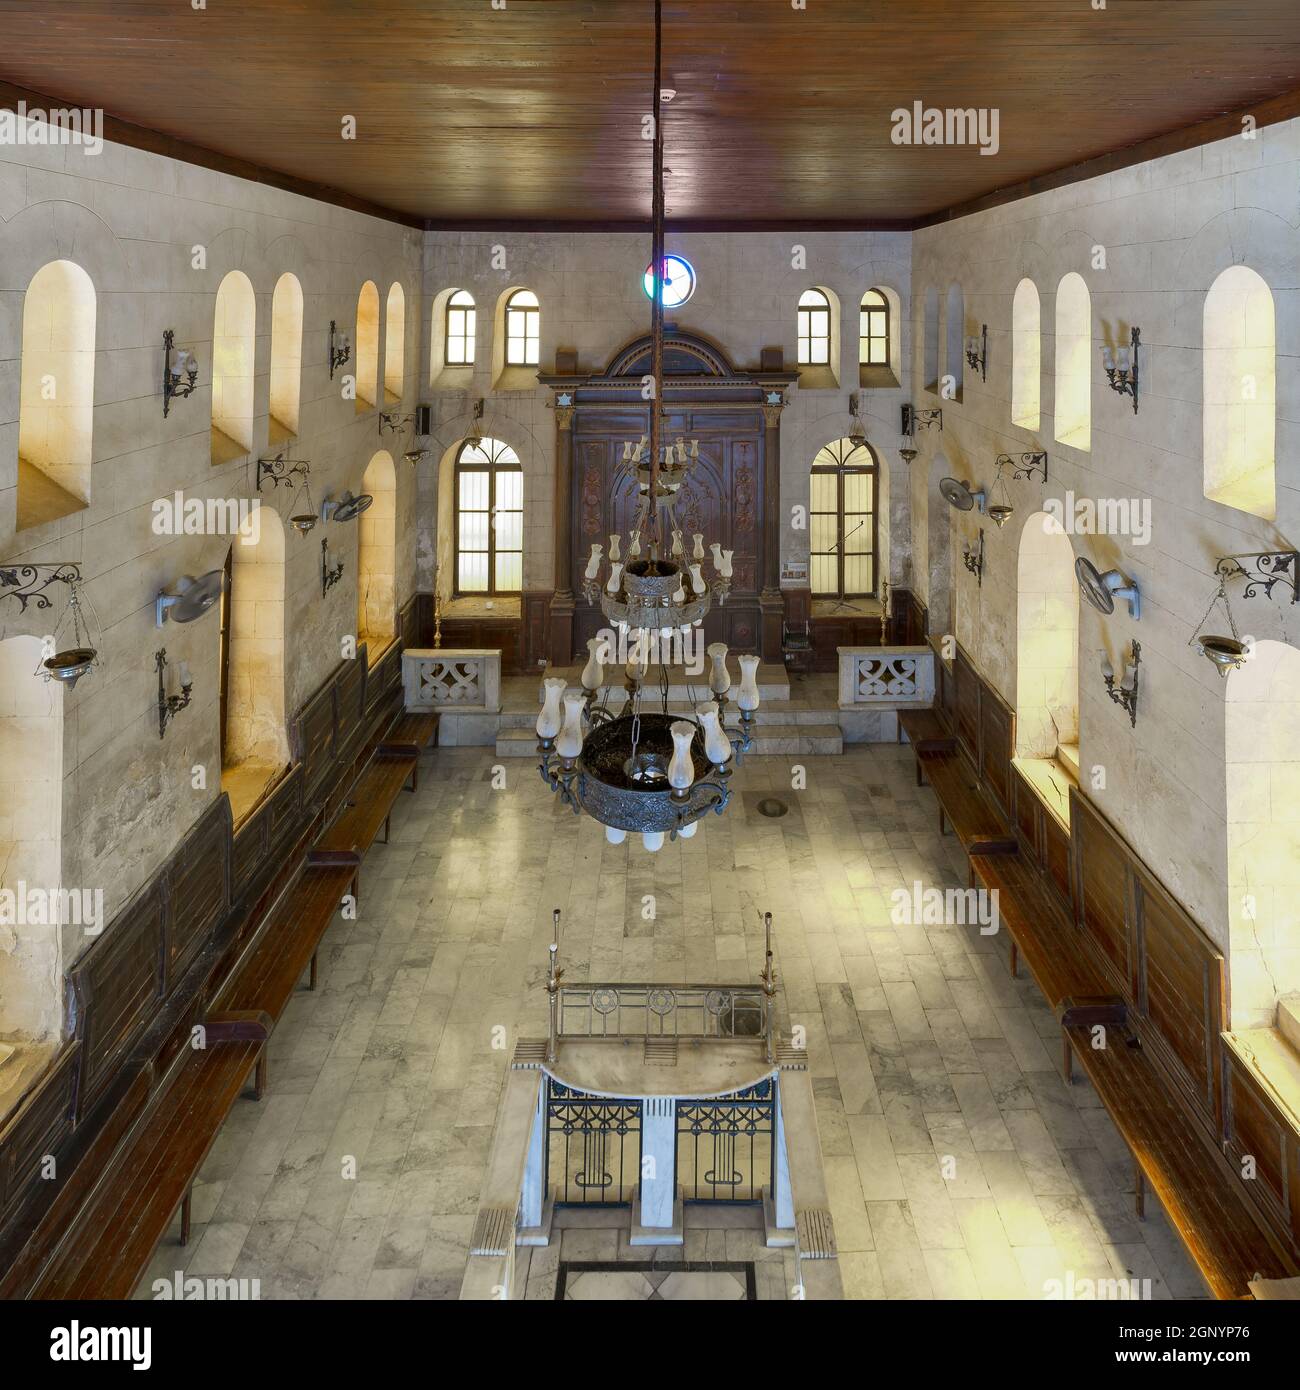 From above interior view of historic Jewish Maimonides Synagogue or Rav Moshe Synagogue with arched windows and chandelier in Gamalia district, Cairo Egypt Stock Photo